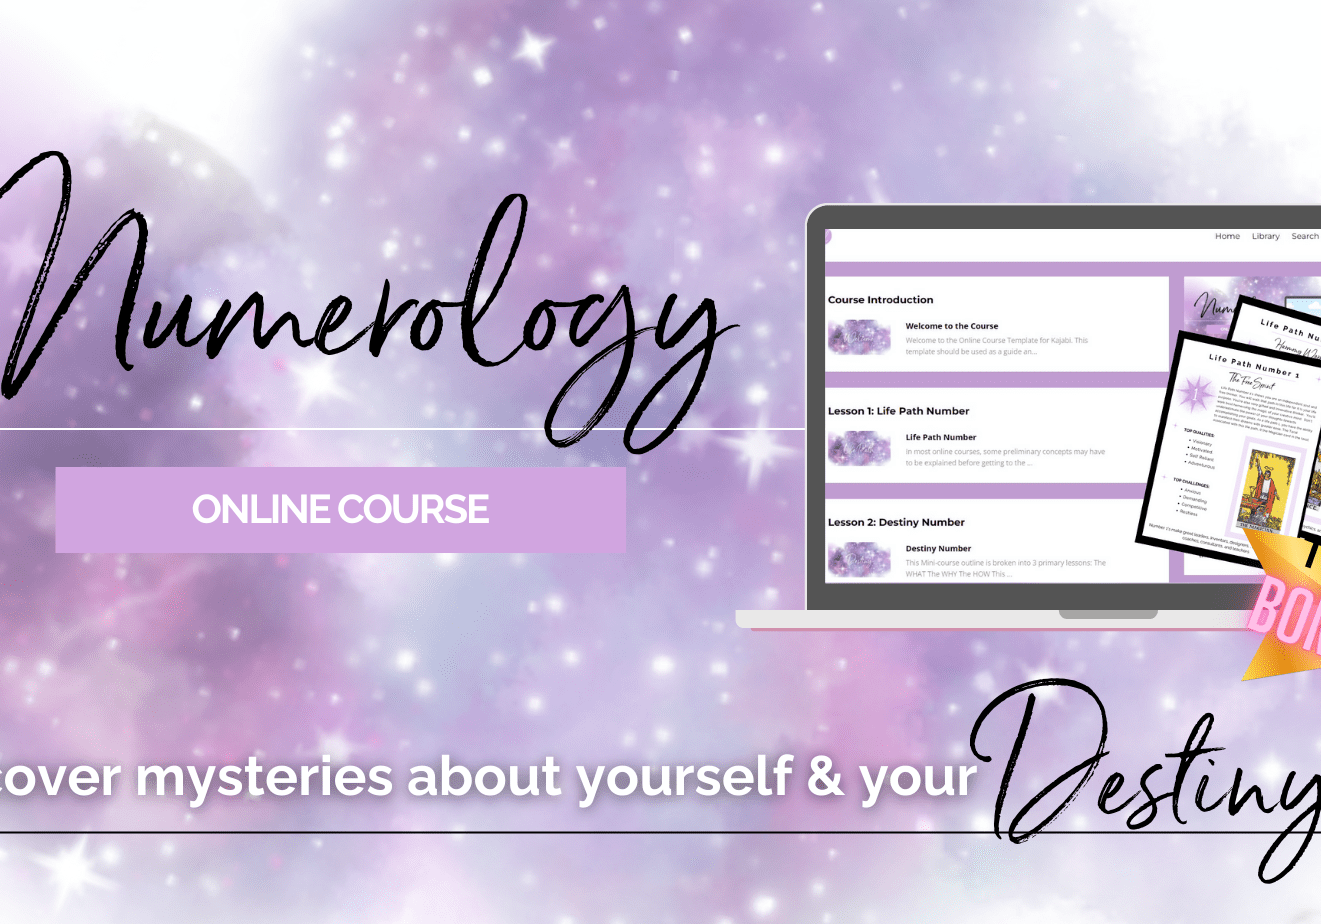 LANDING PAGE - BEGINNERS GUIDE TO PSYCHIC MEDIUMSHIP ABILITIES (16)